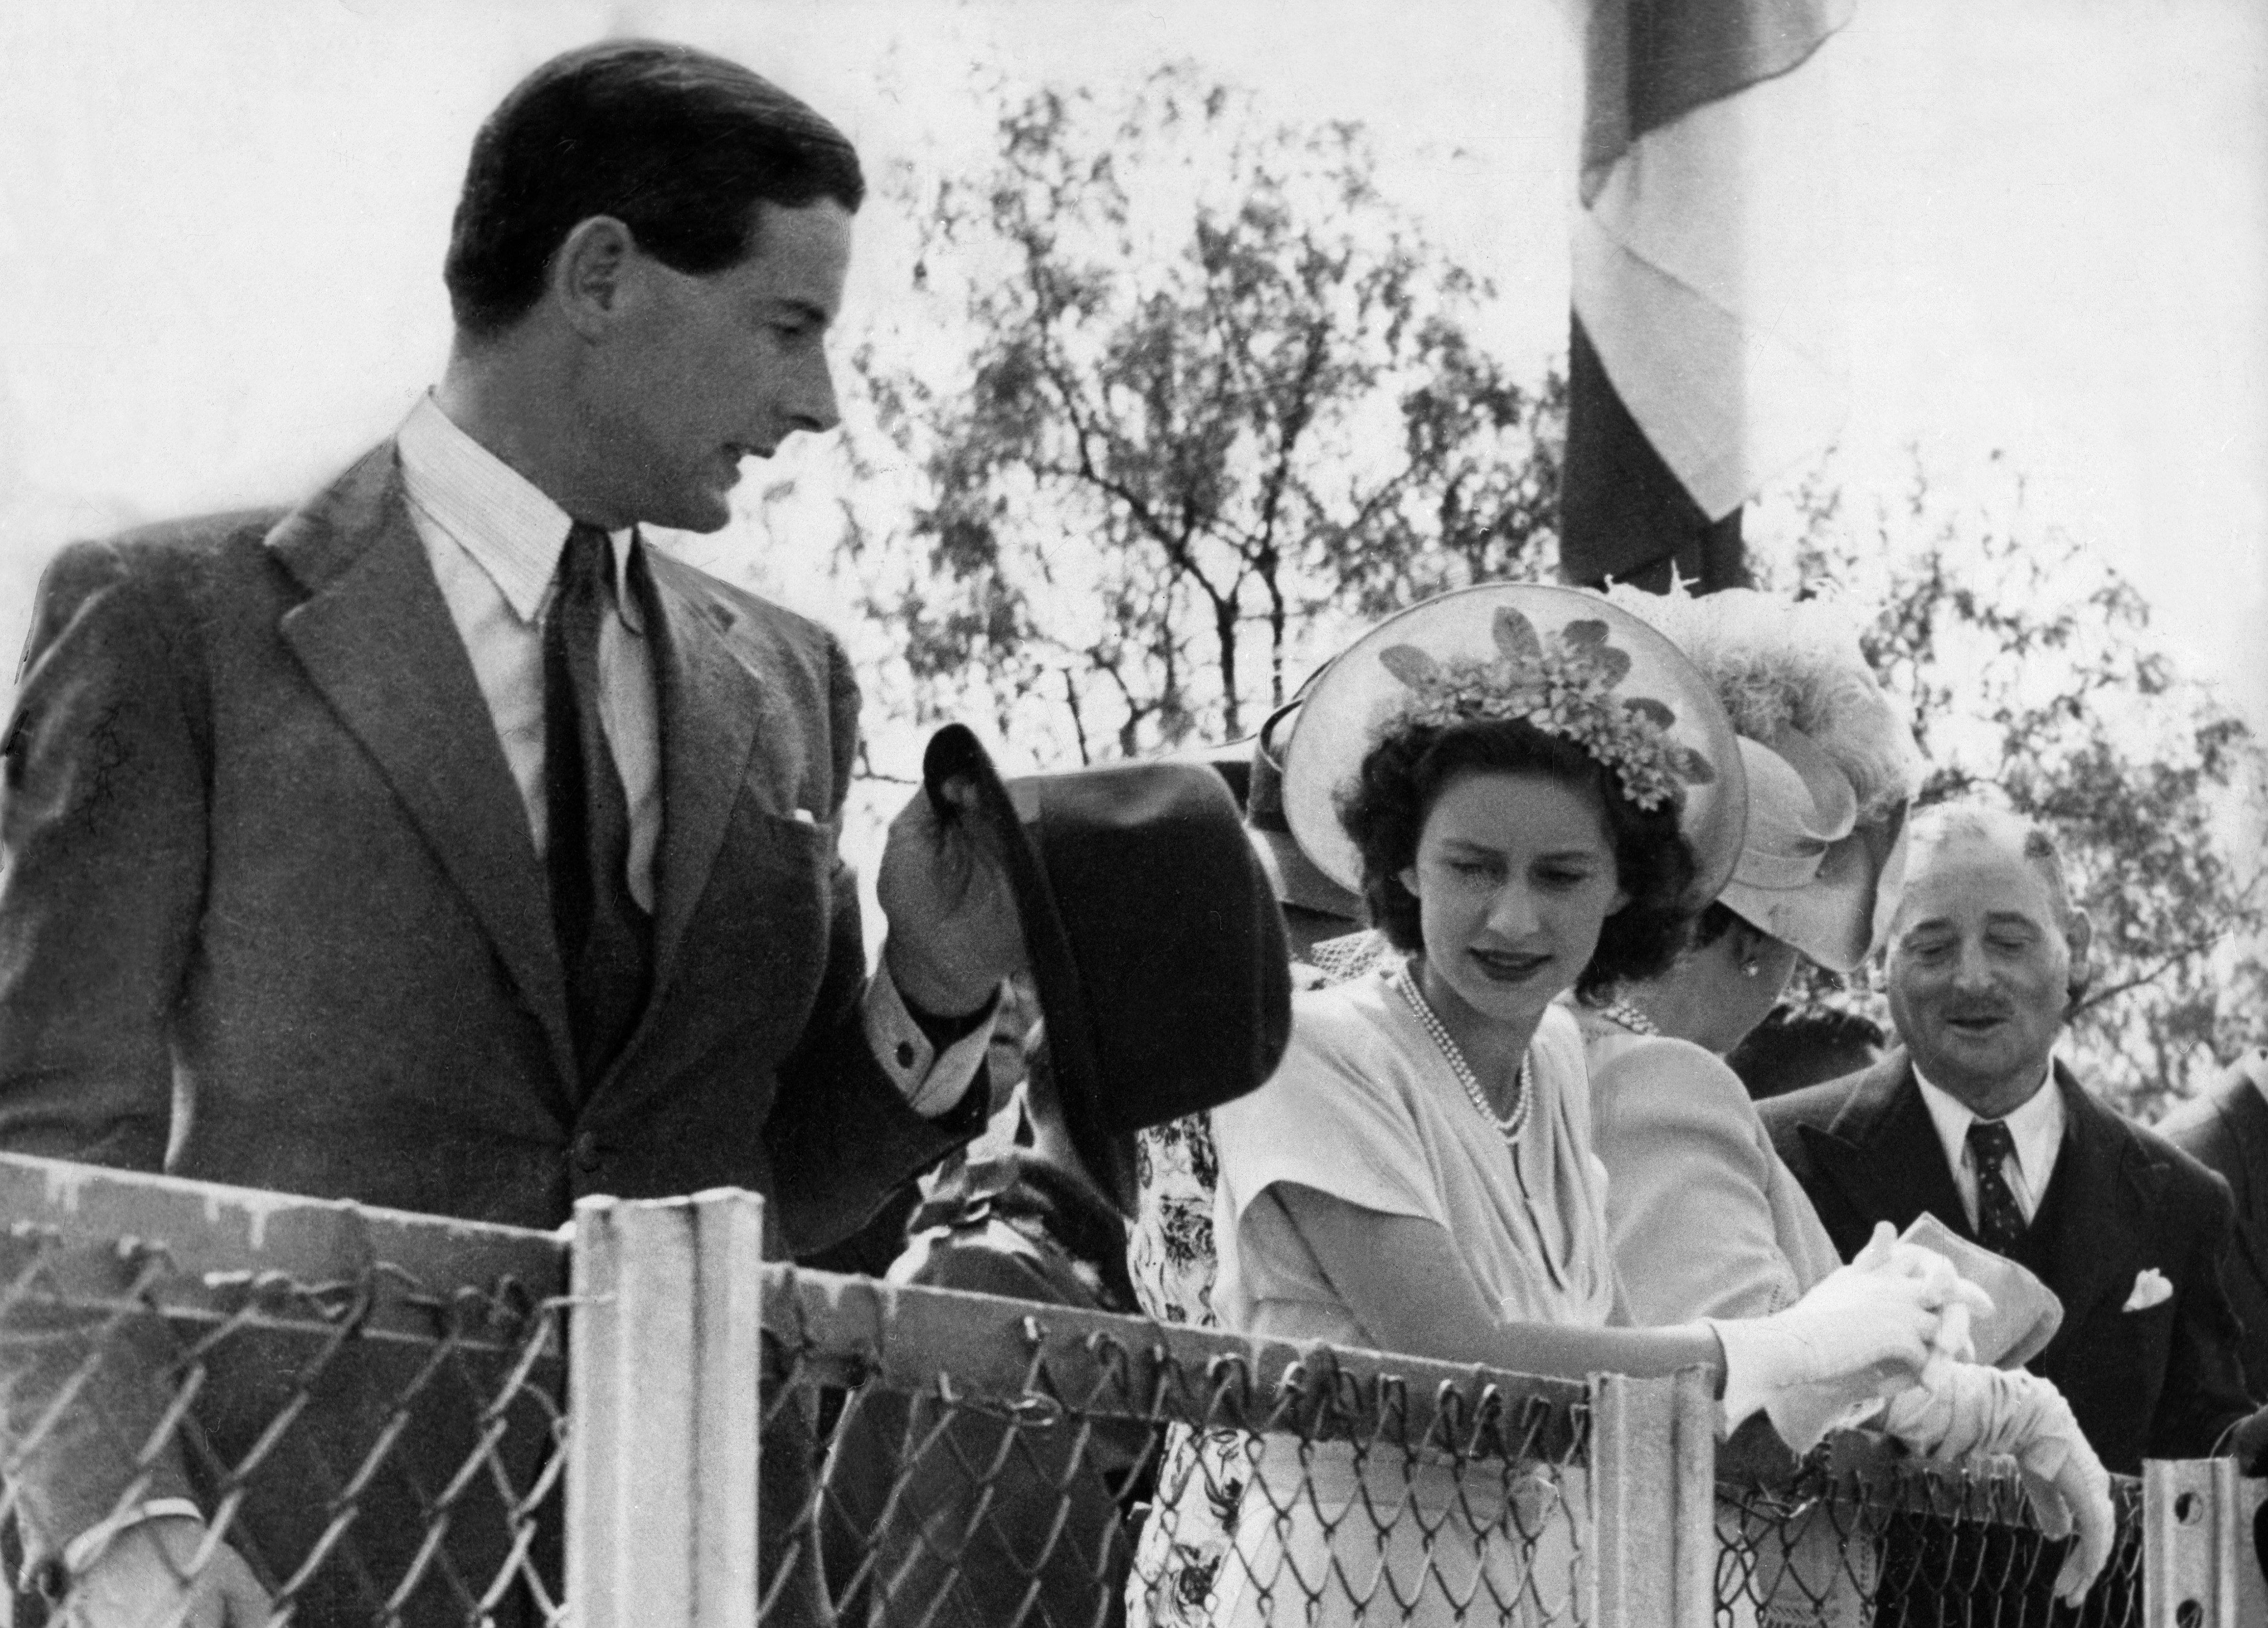 Princess Margaret with Group Captain Peter Townsend in South Africa during the Royal Tour, in 1947. (ullstein bild—ullstein bild via Getty Images)